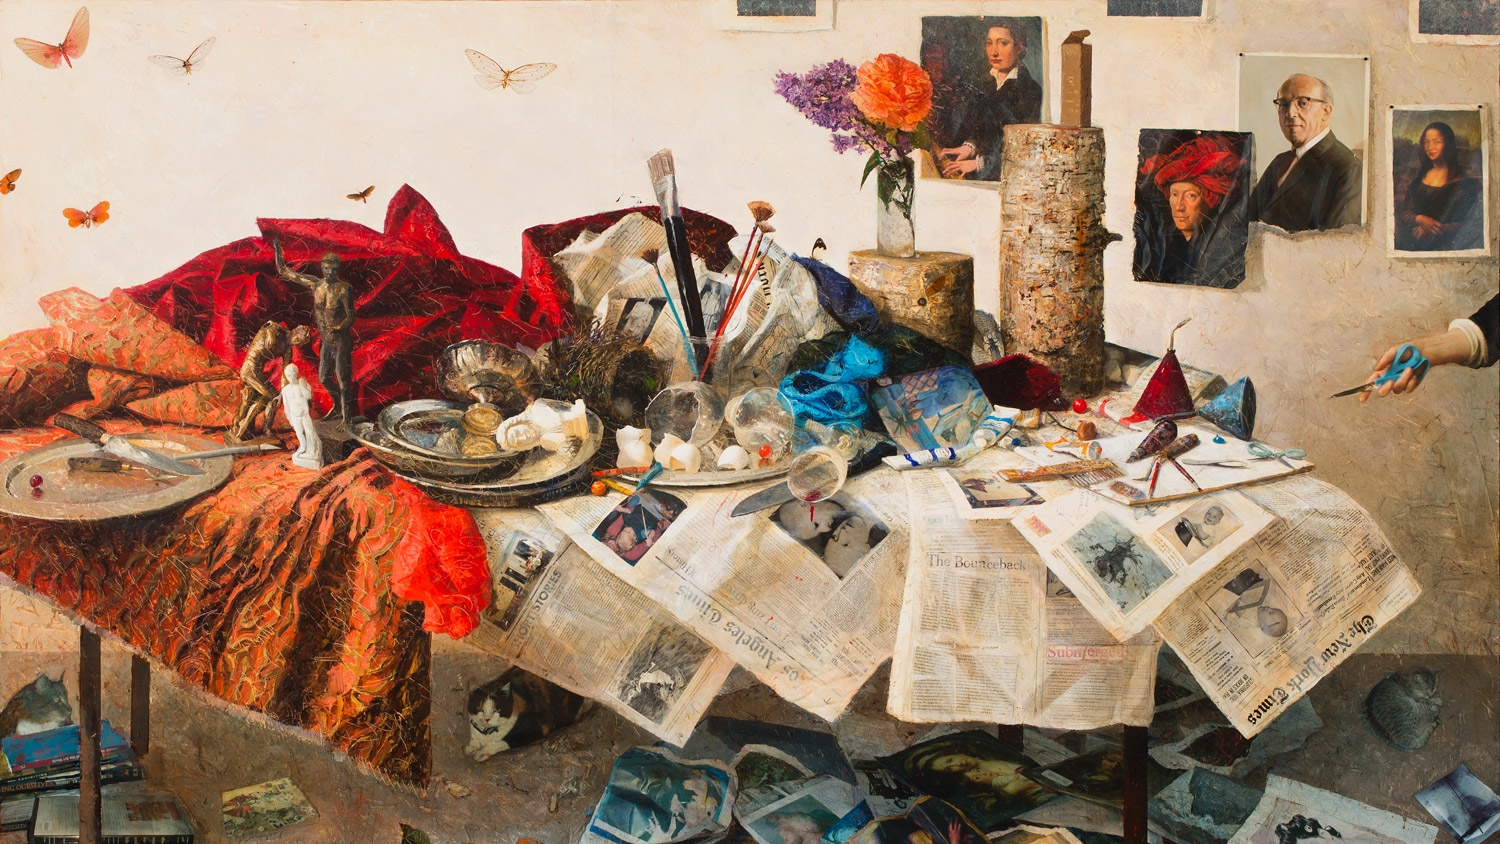 Painting of a still life table with newspapers, art supplies, food, flowers, paintings tacked to the wall